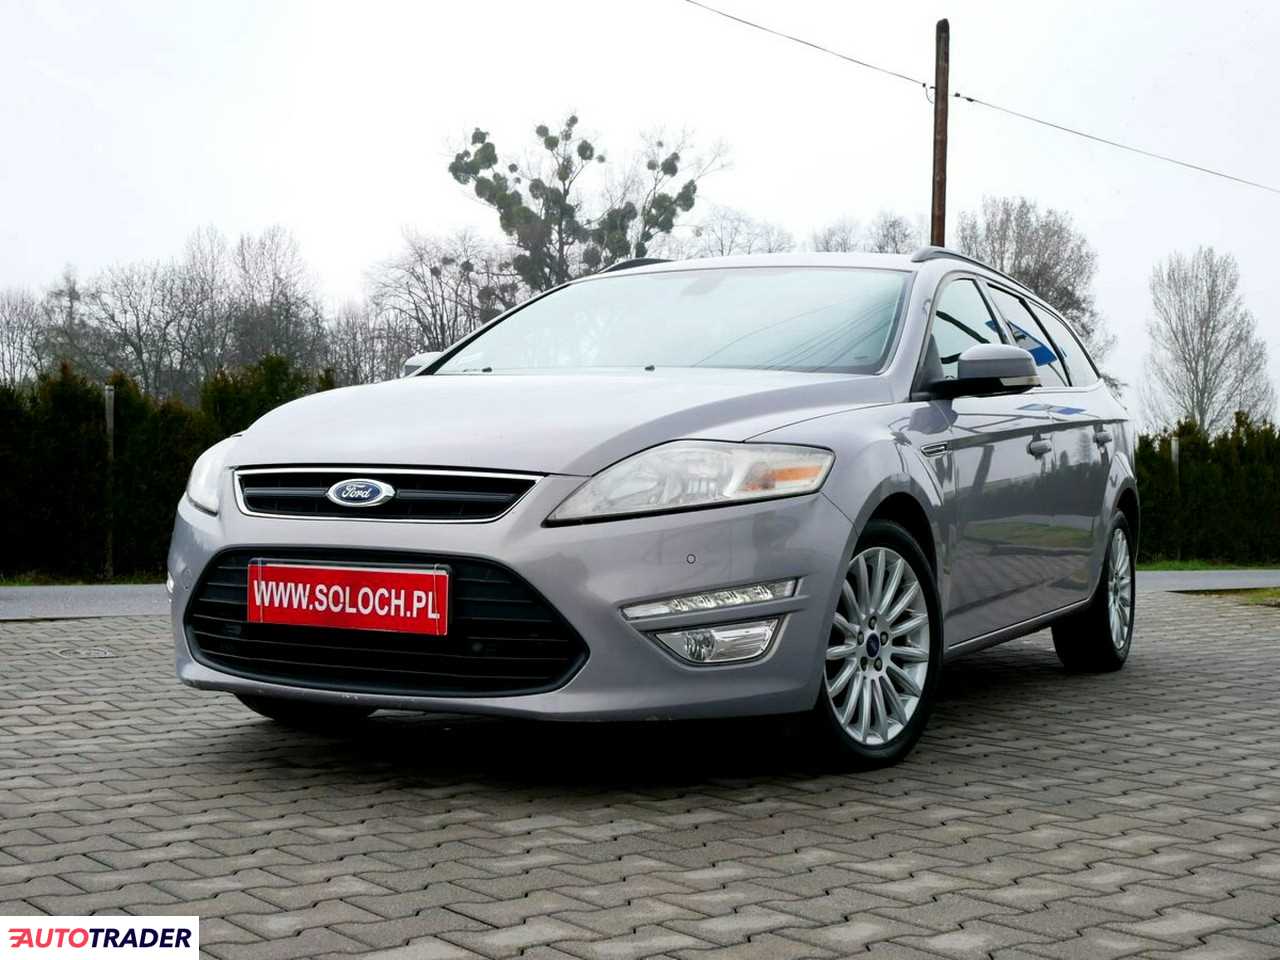 Ford Mondeo 2013 2.0 163 KM